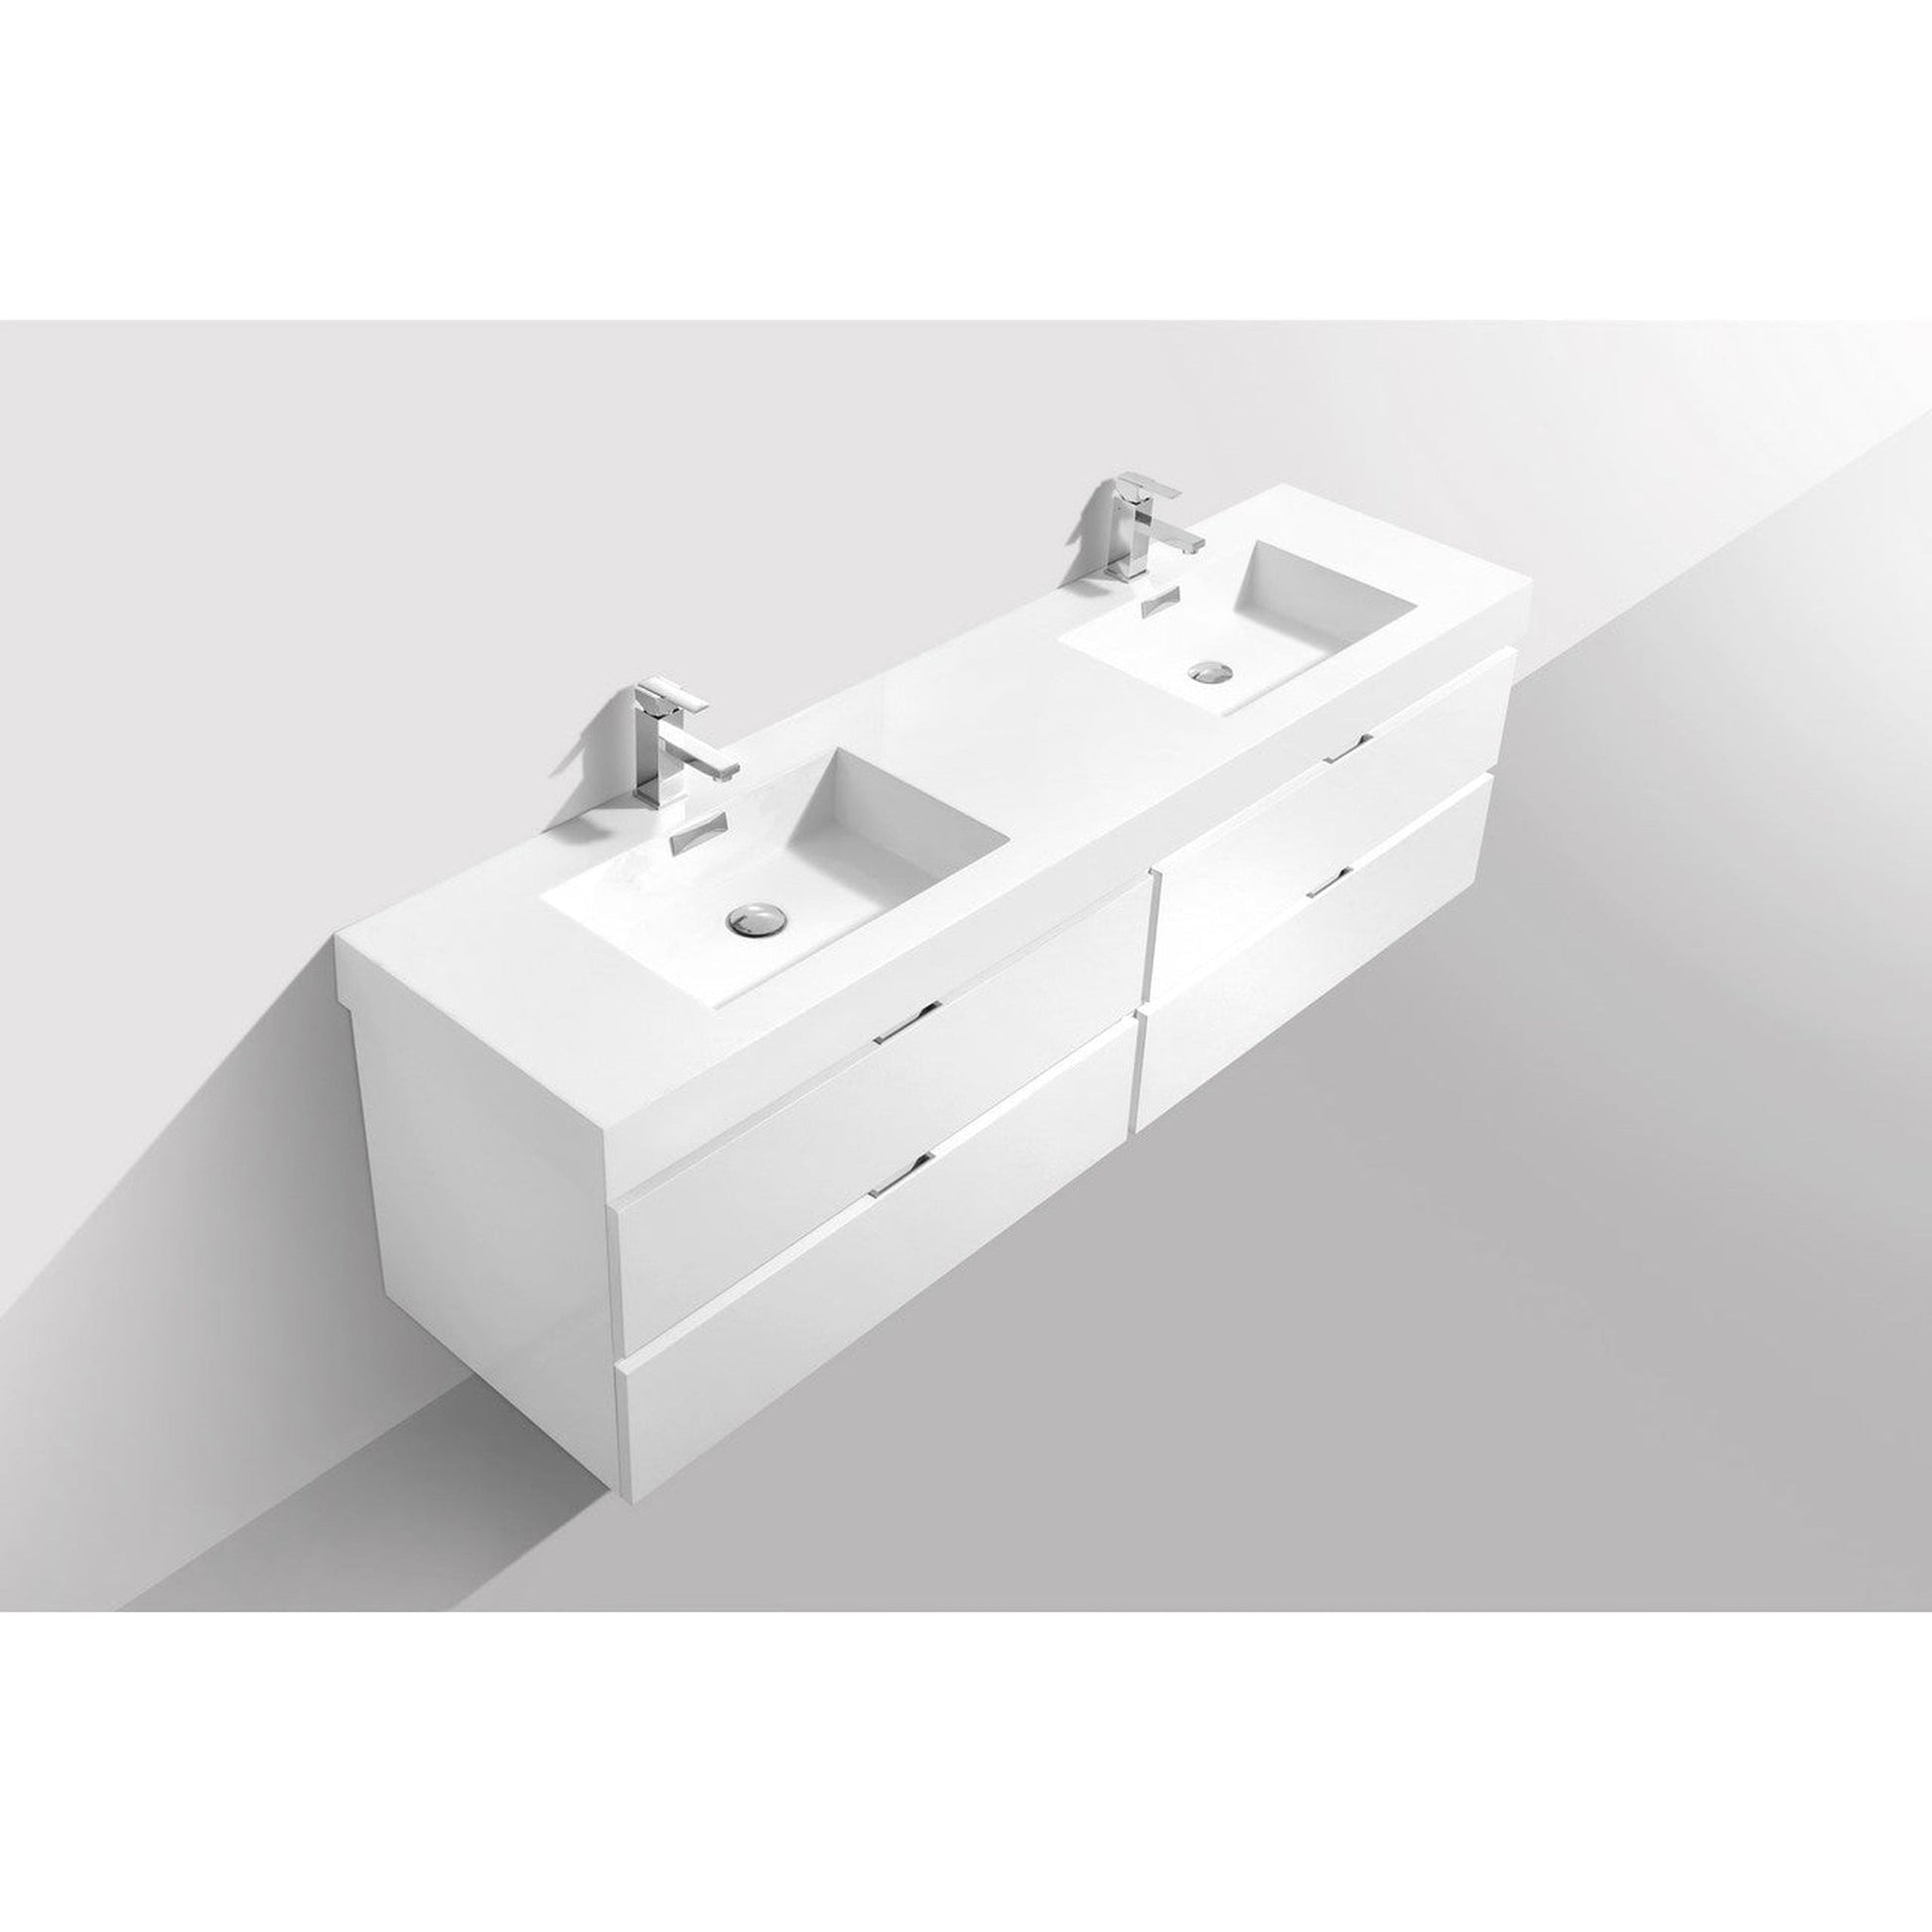 KubeBath Bliss 72" High Gloss White Wall-Mounted Modern Bathroom Vanity With Double Integrated Acrylic Sink With Overflow and 24" White Framed Two Mirrors